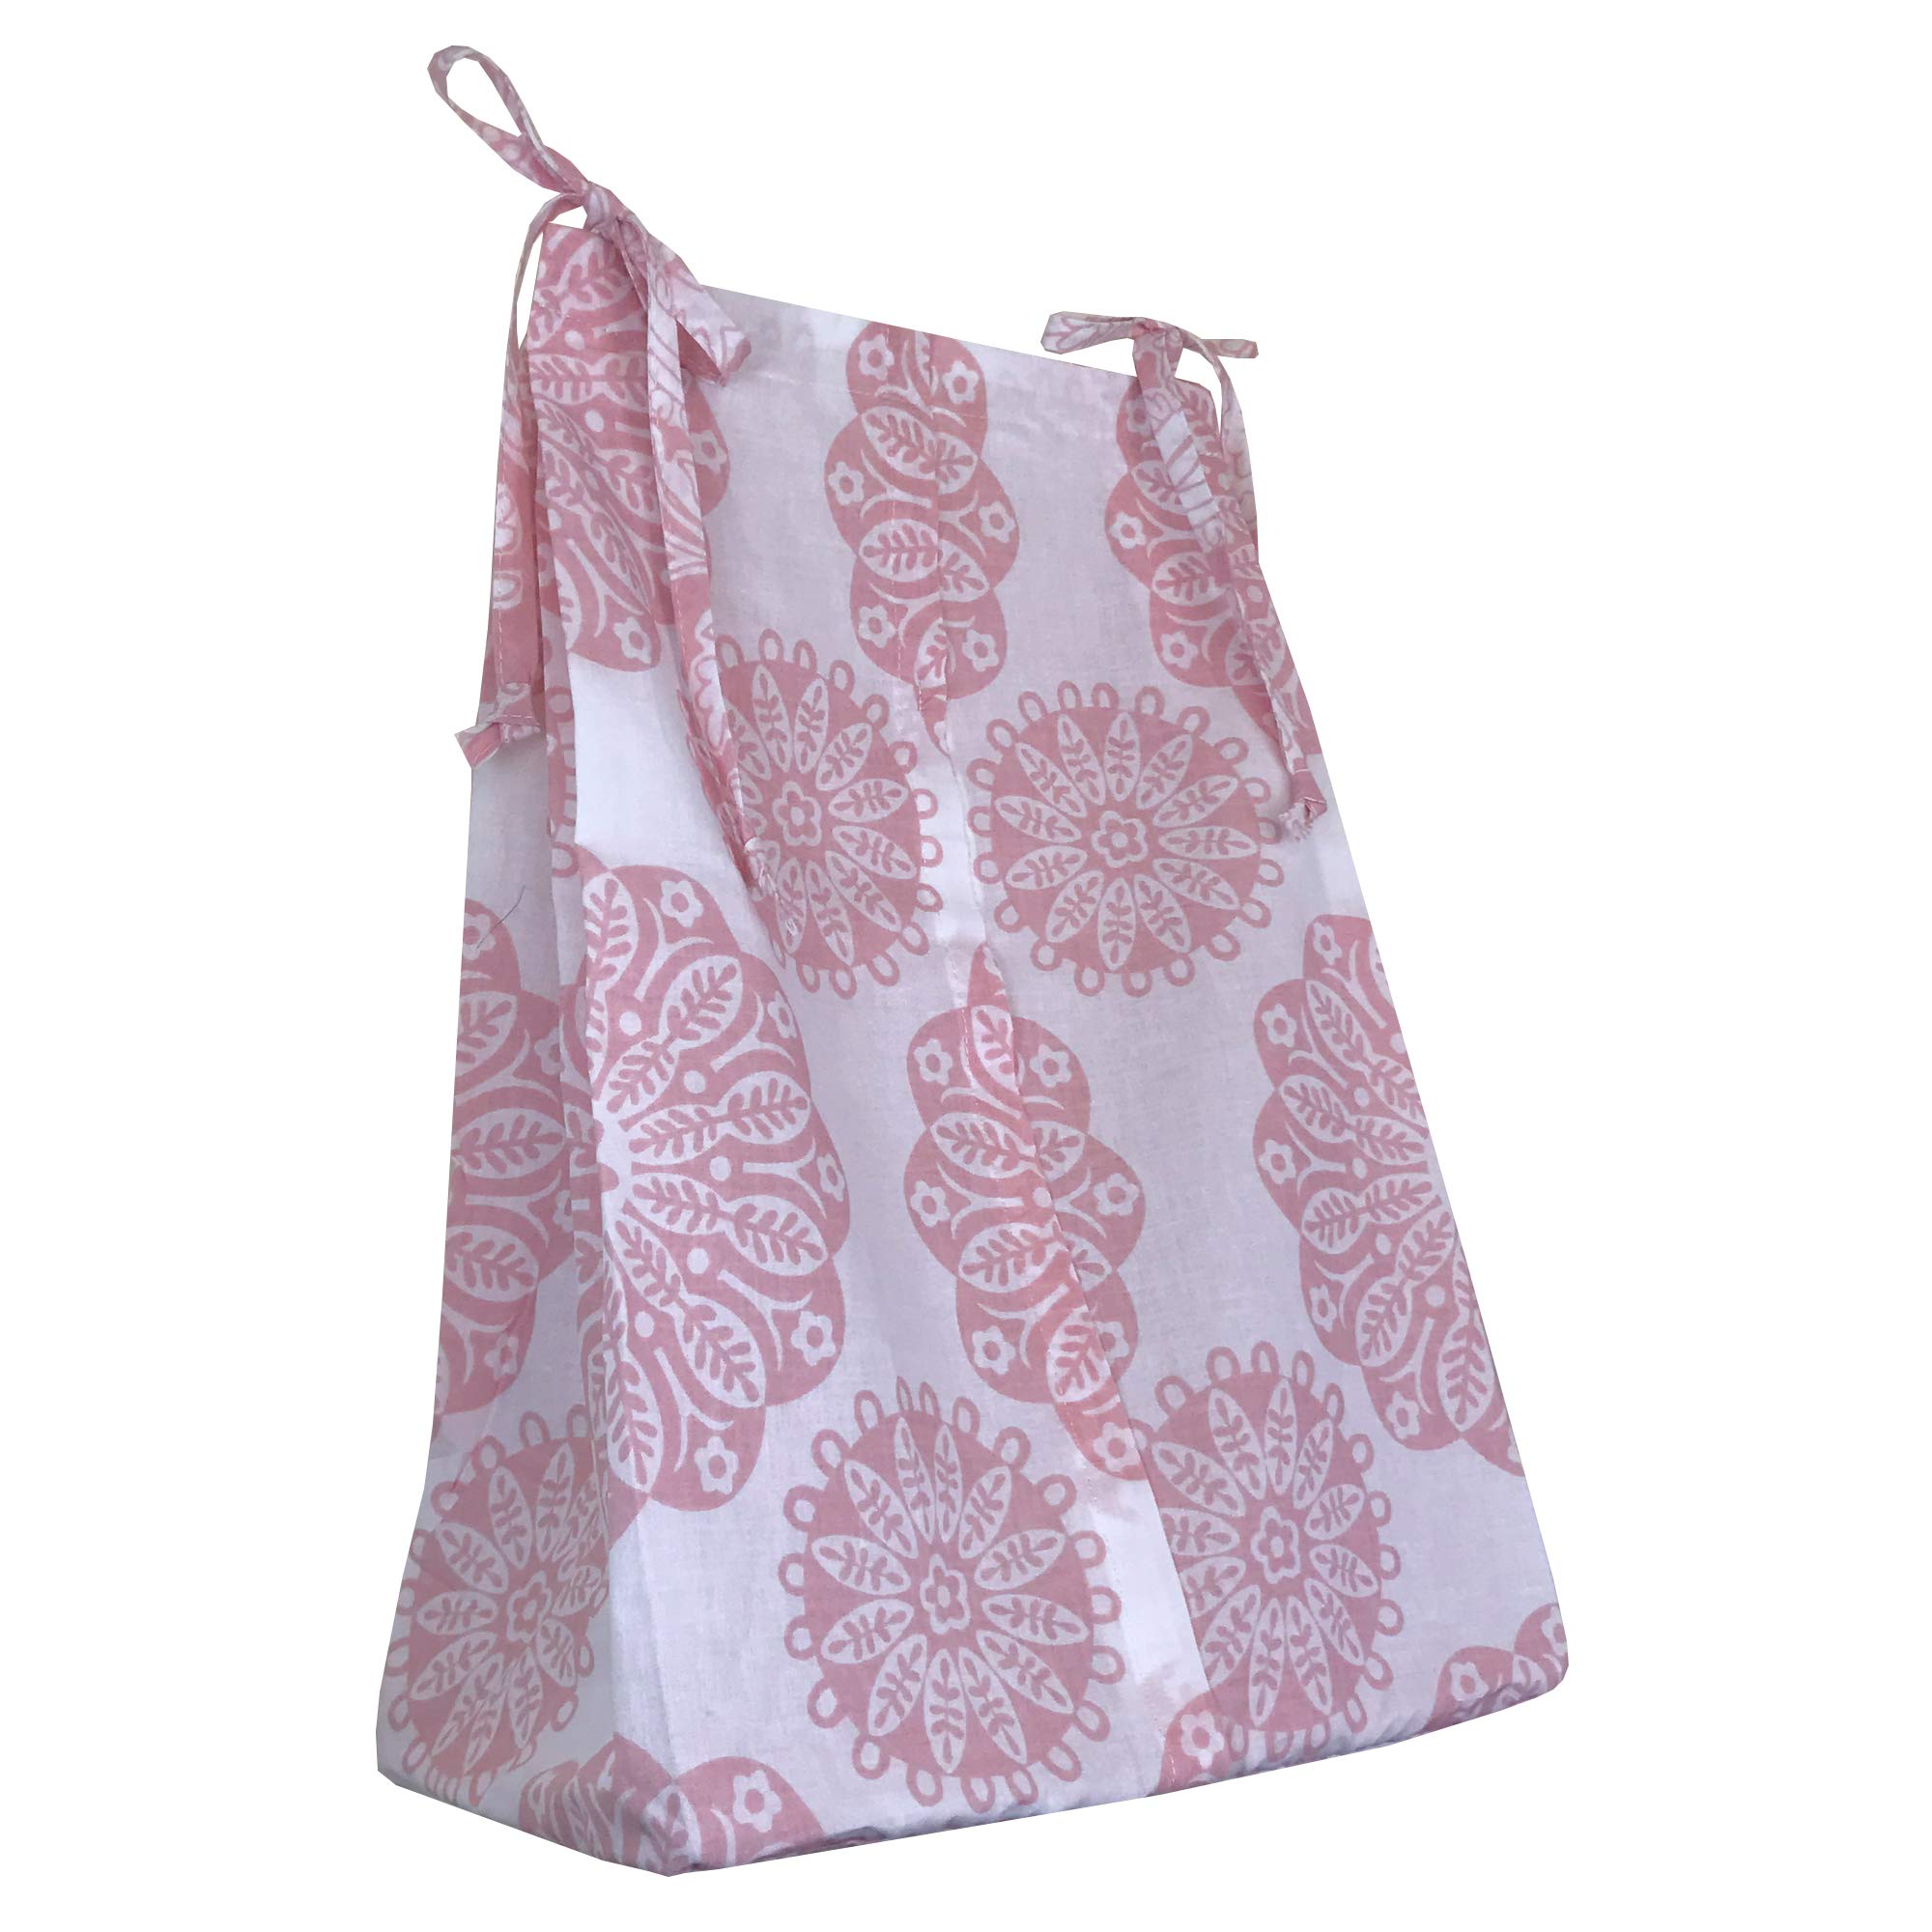 Cotton Tale Designs Diaper Stacker, Sweet & Simple Pink